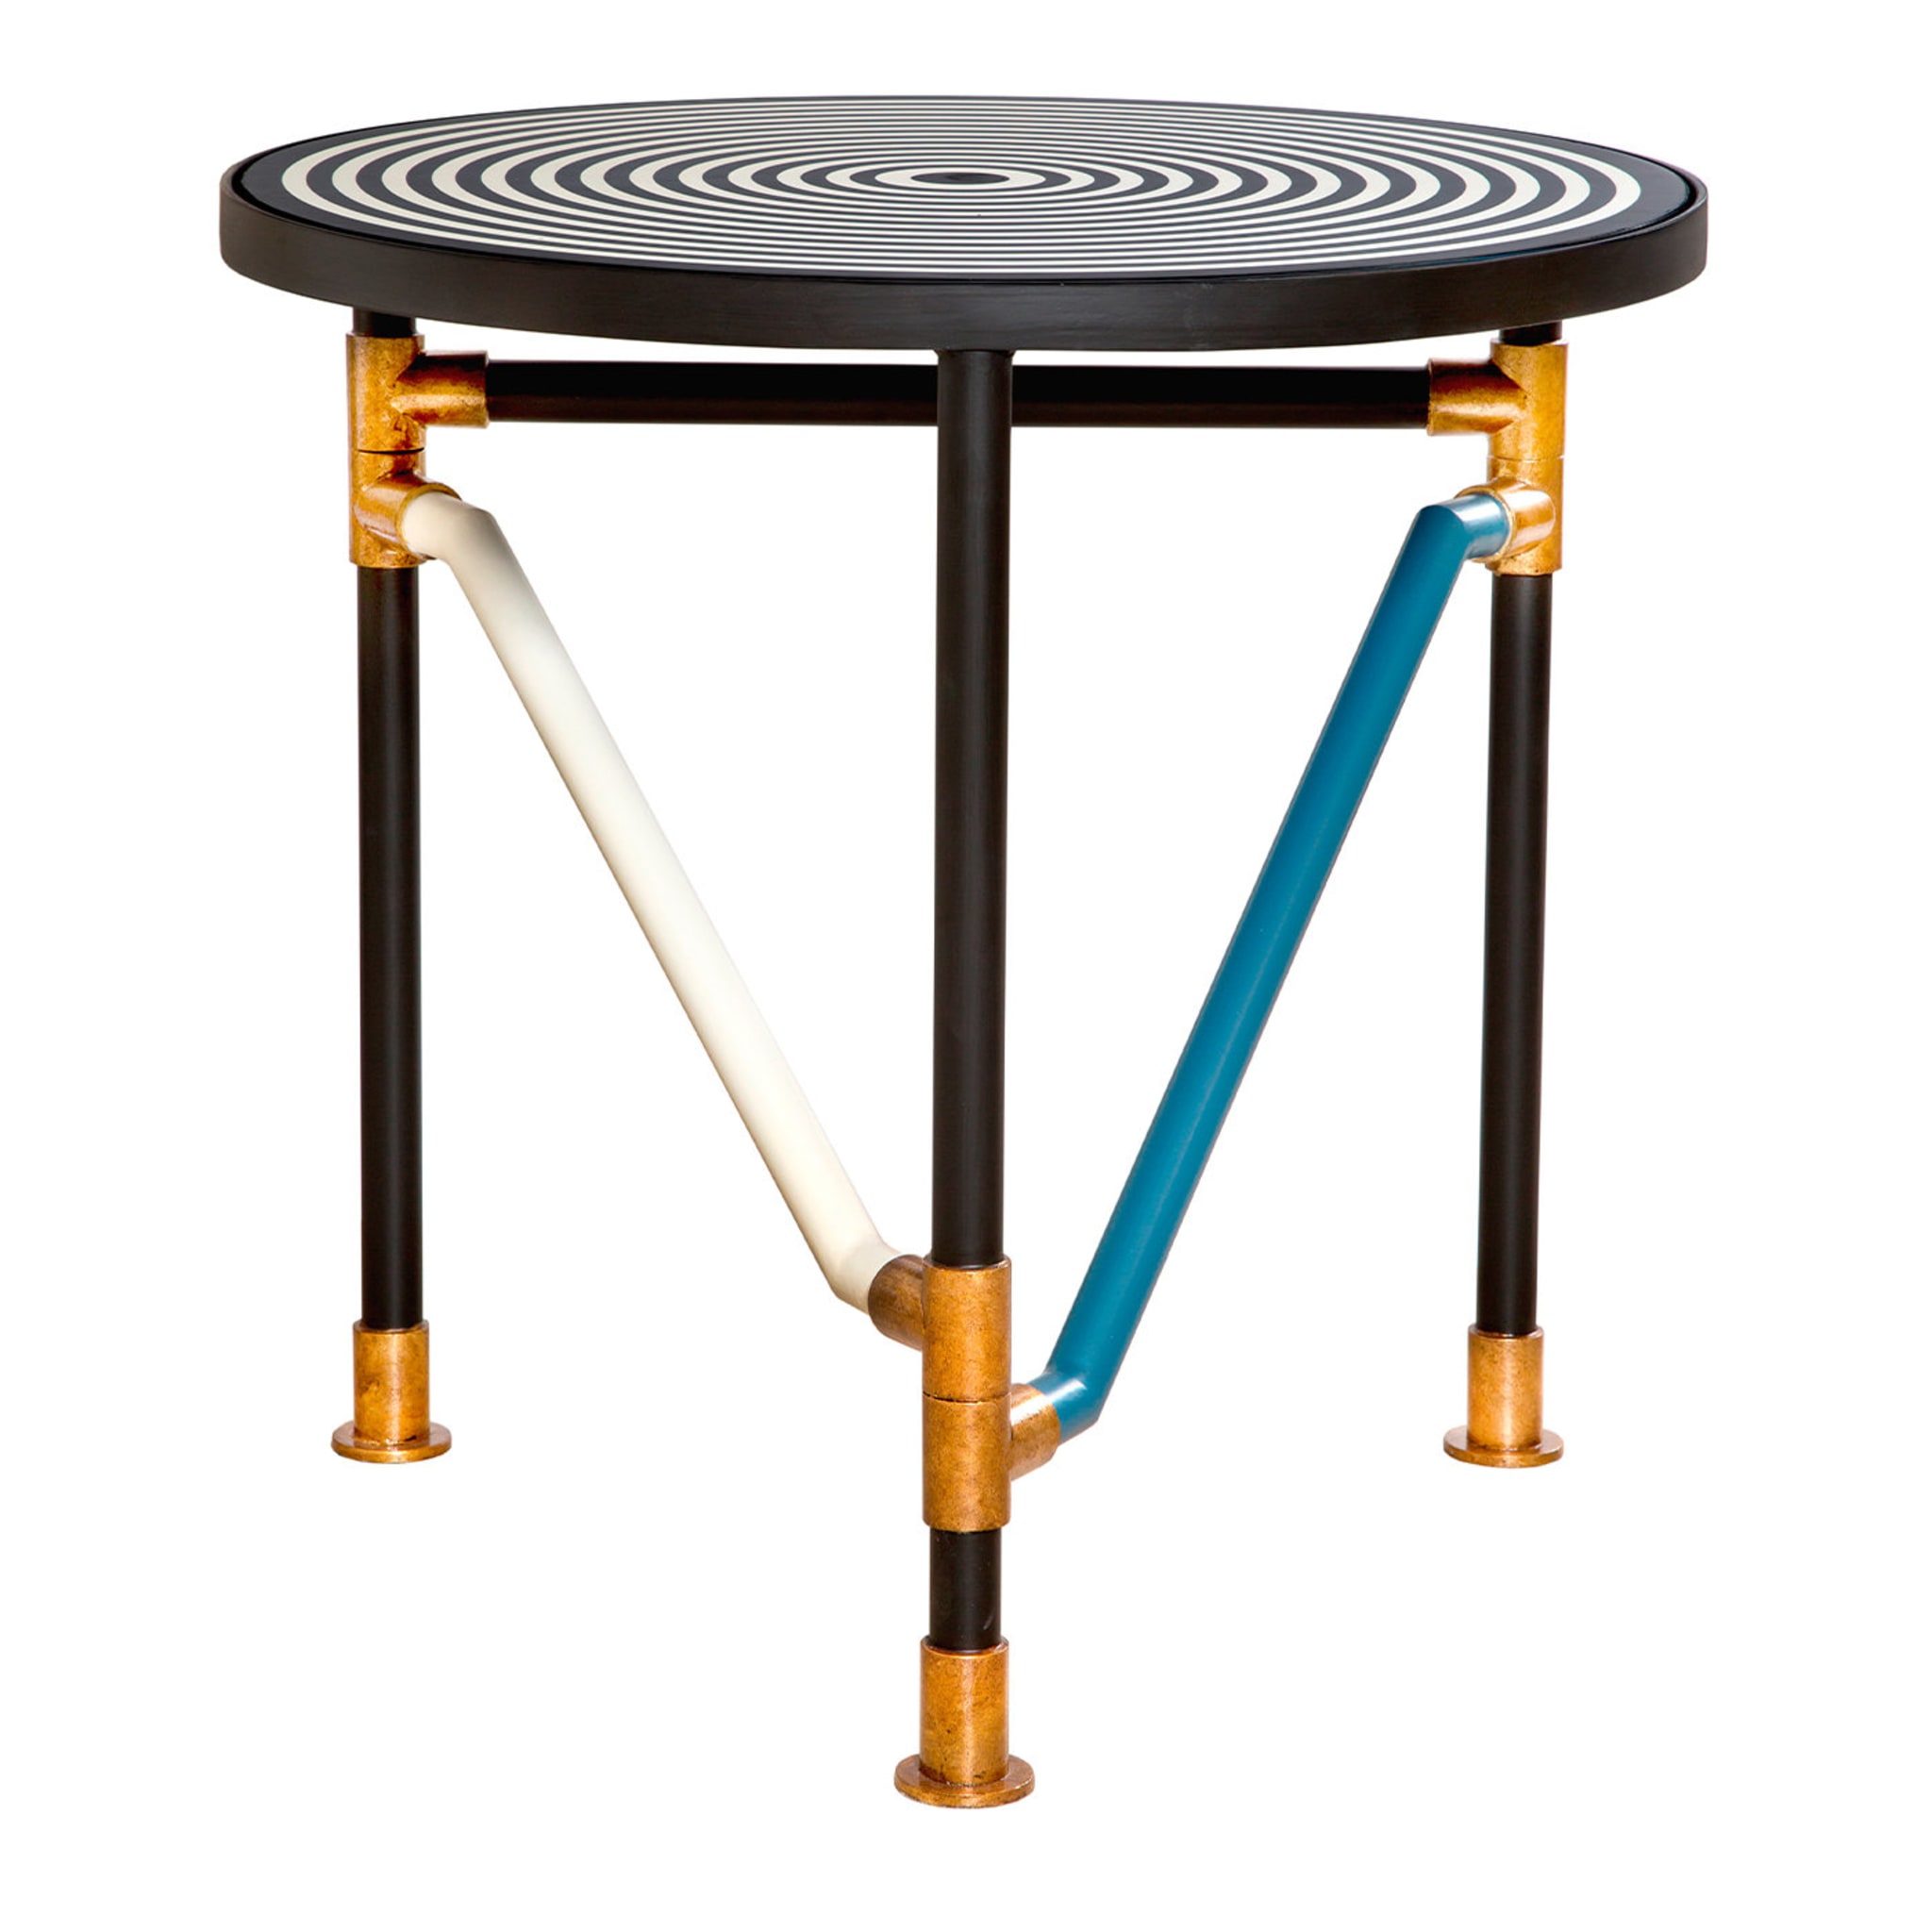 Concentrico Patterned Side Table - Alternative view 1